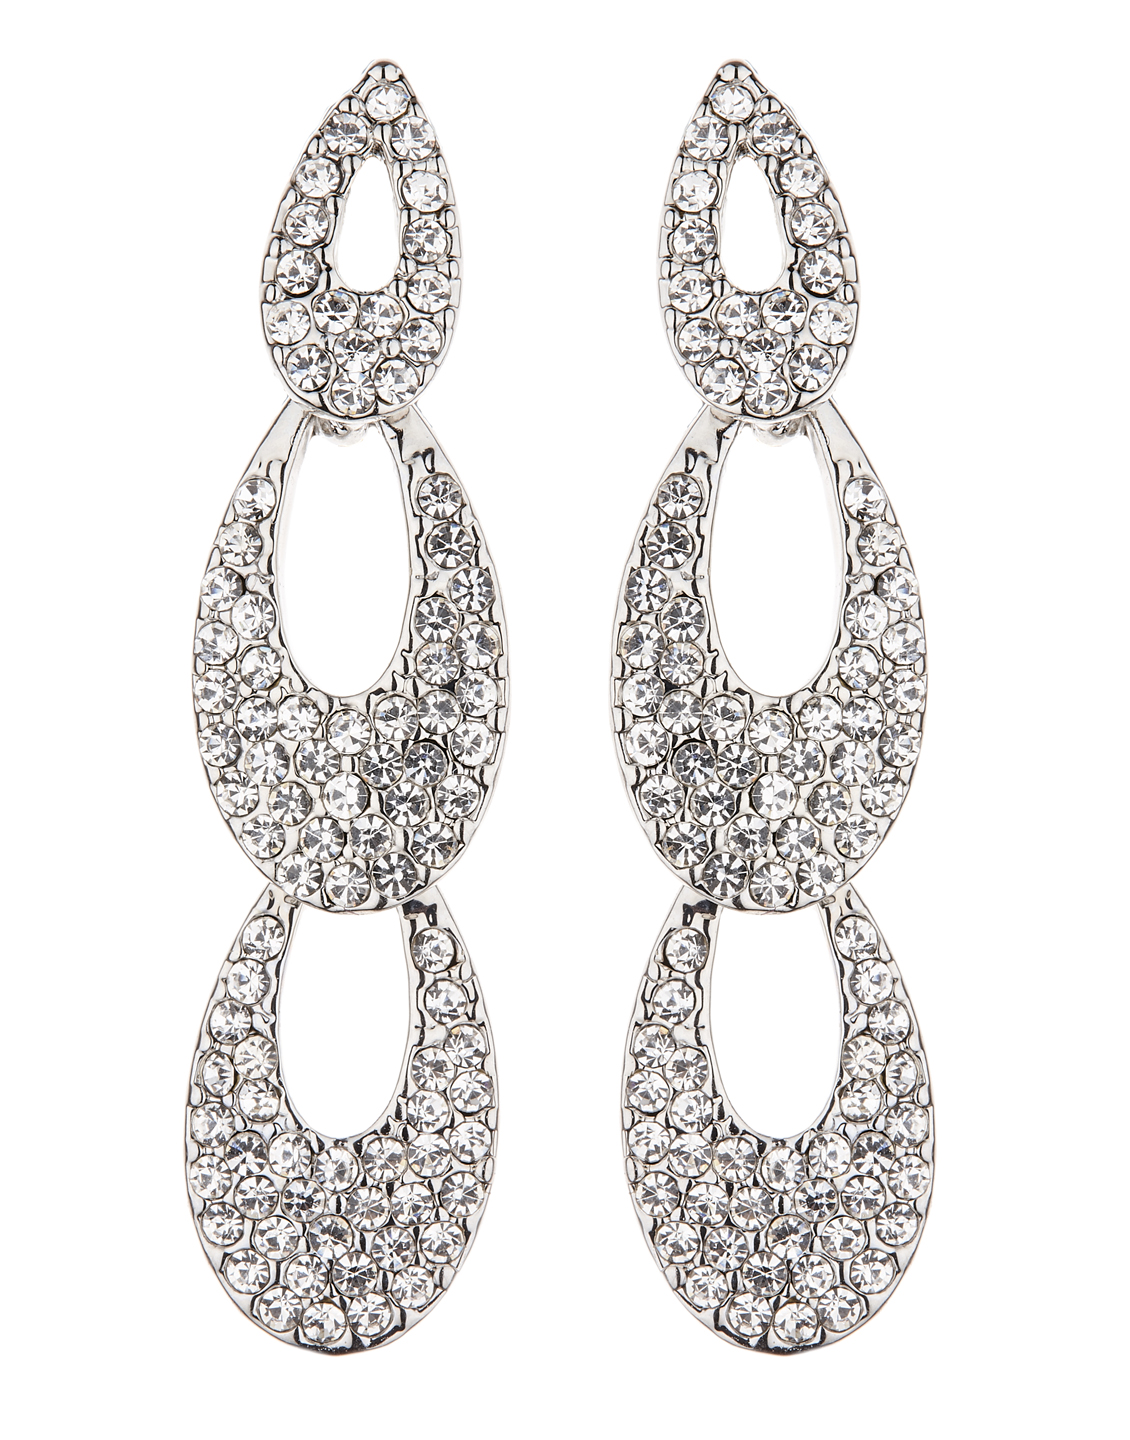 Clip On Earrings - Blake S - silver drop earring with clear crystals